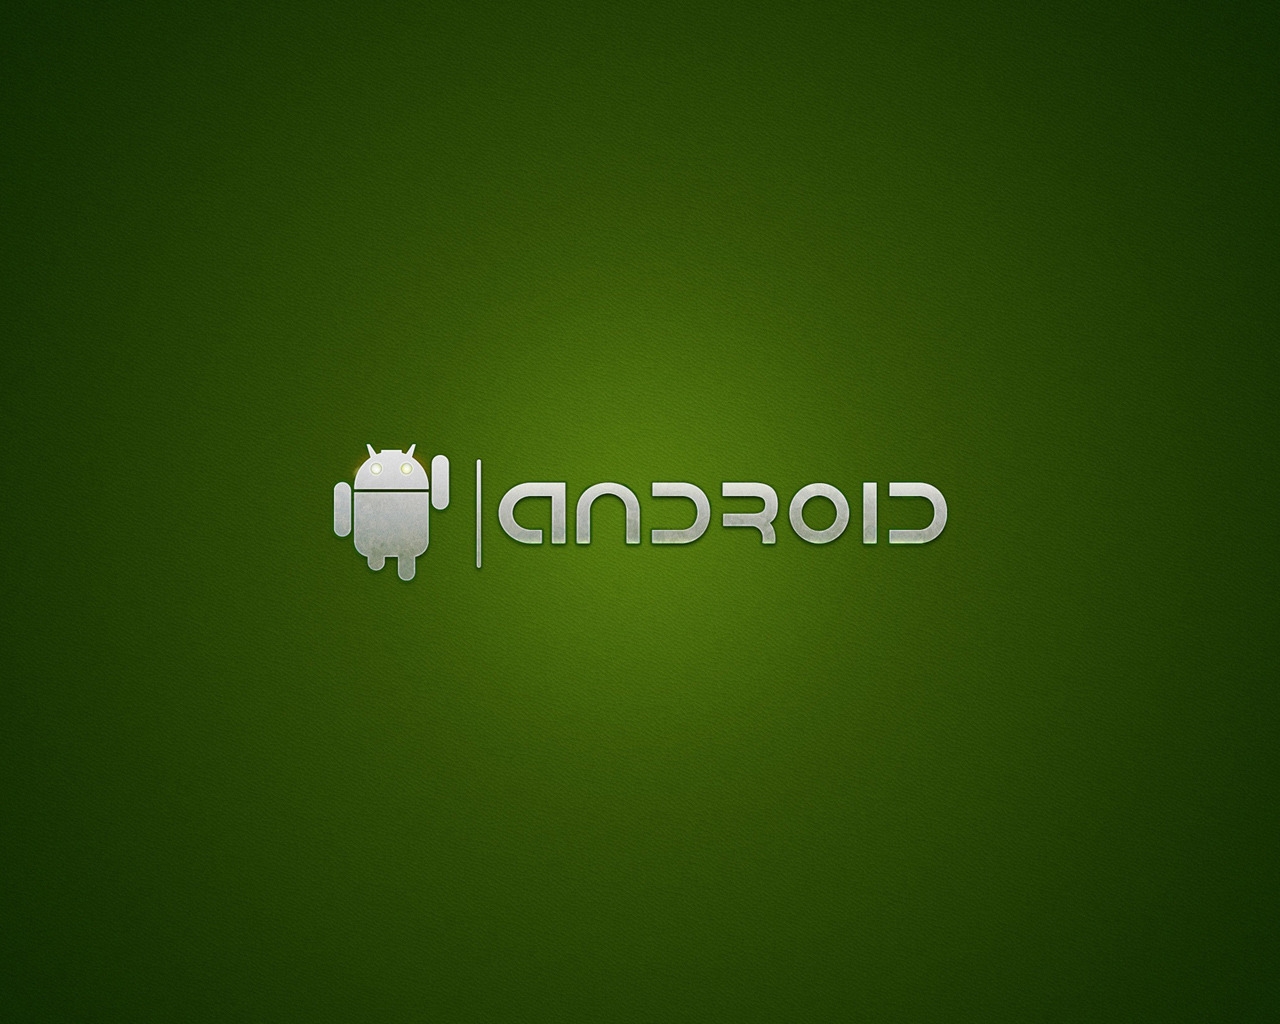 Android for 1280 x 1024 resolution